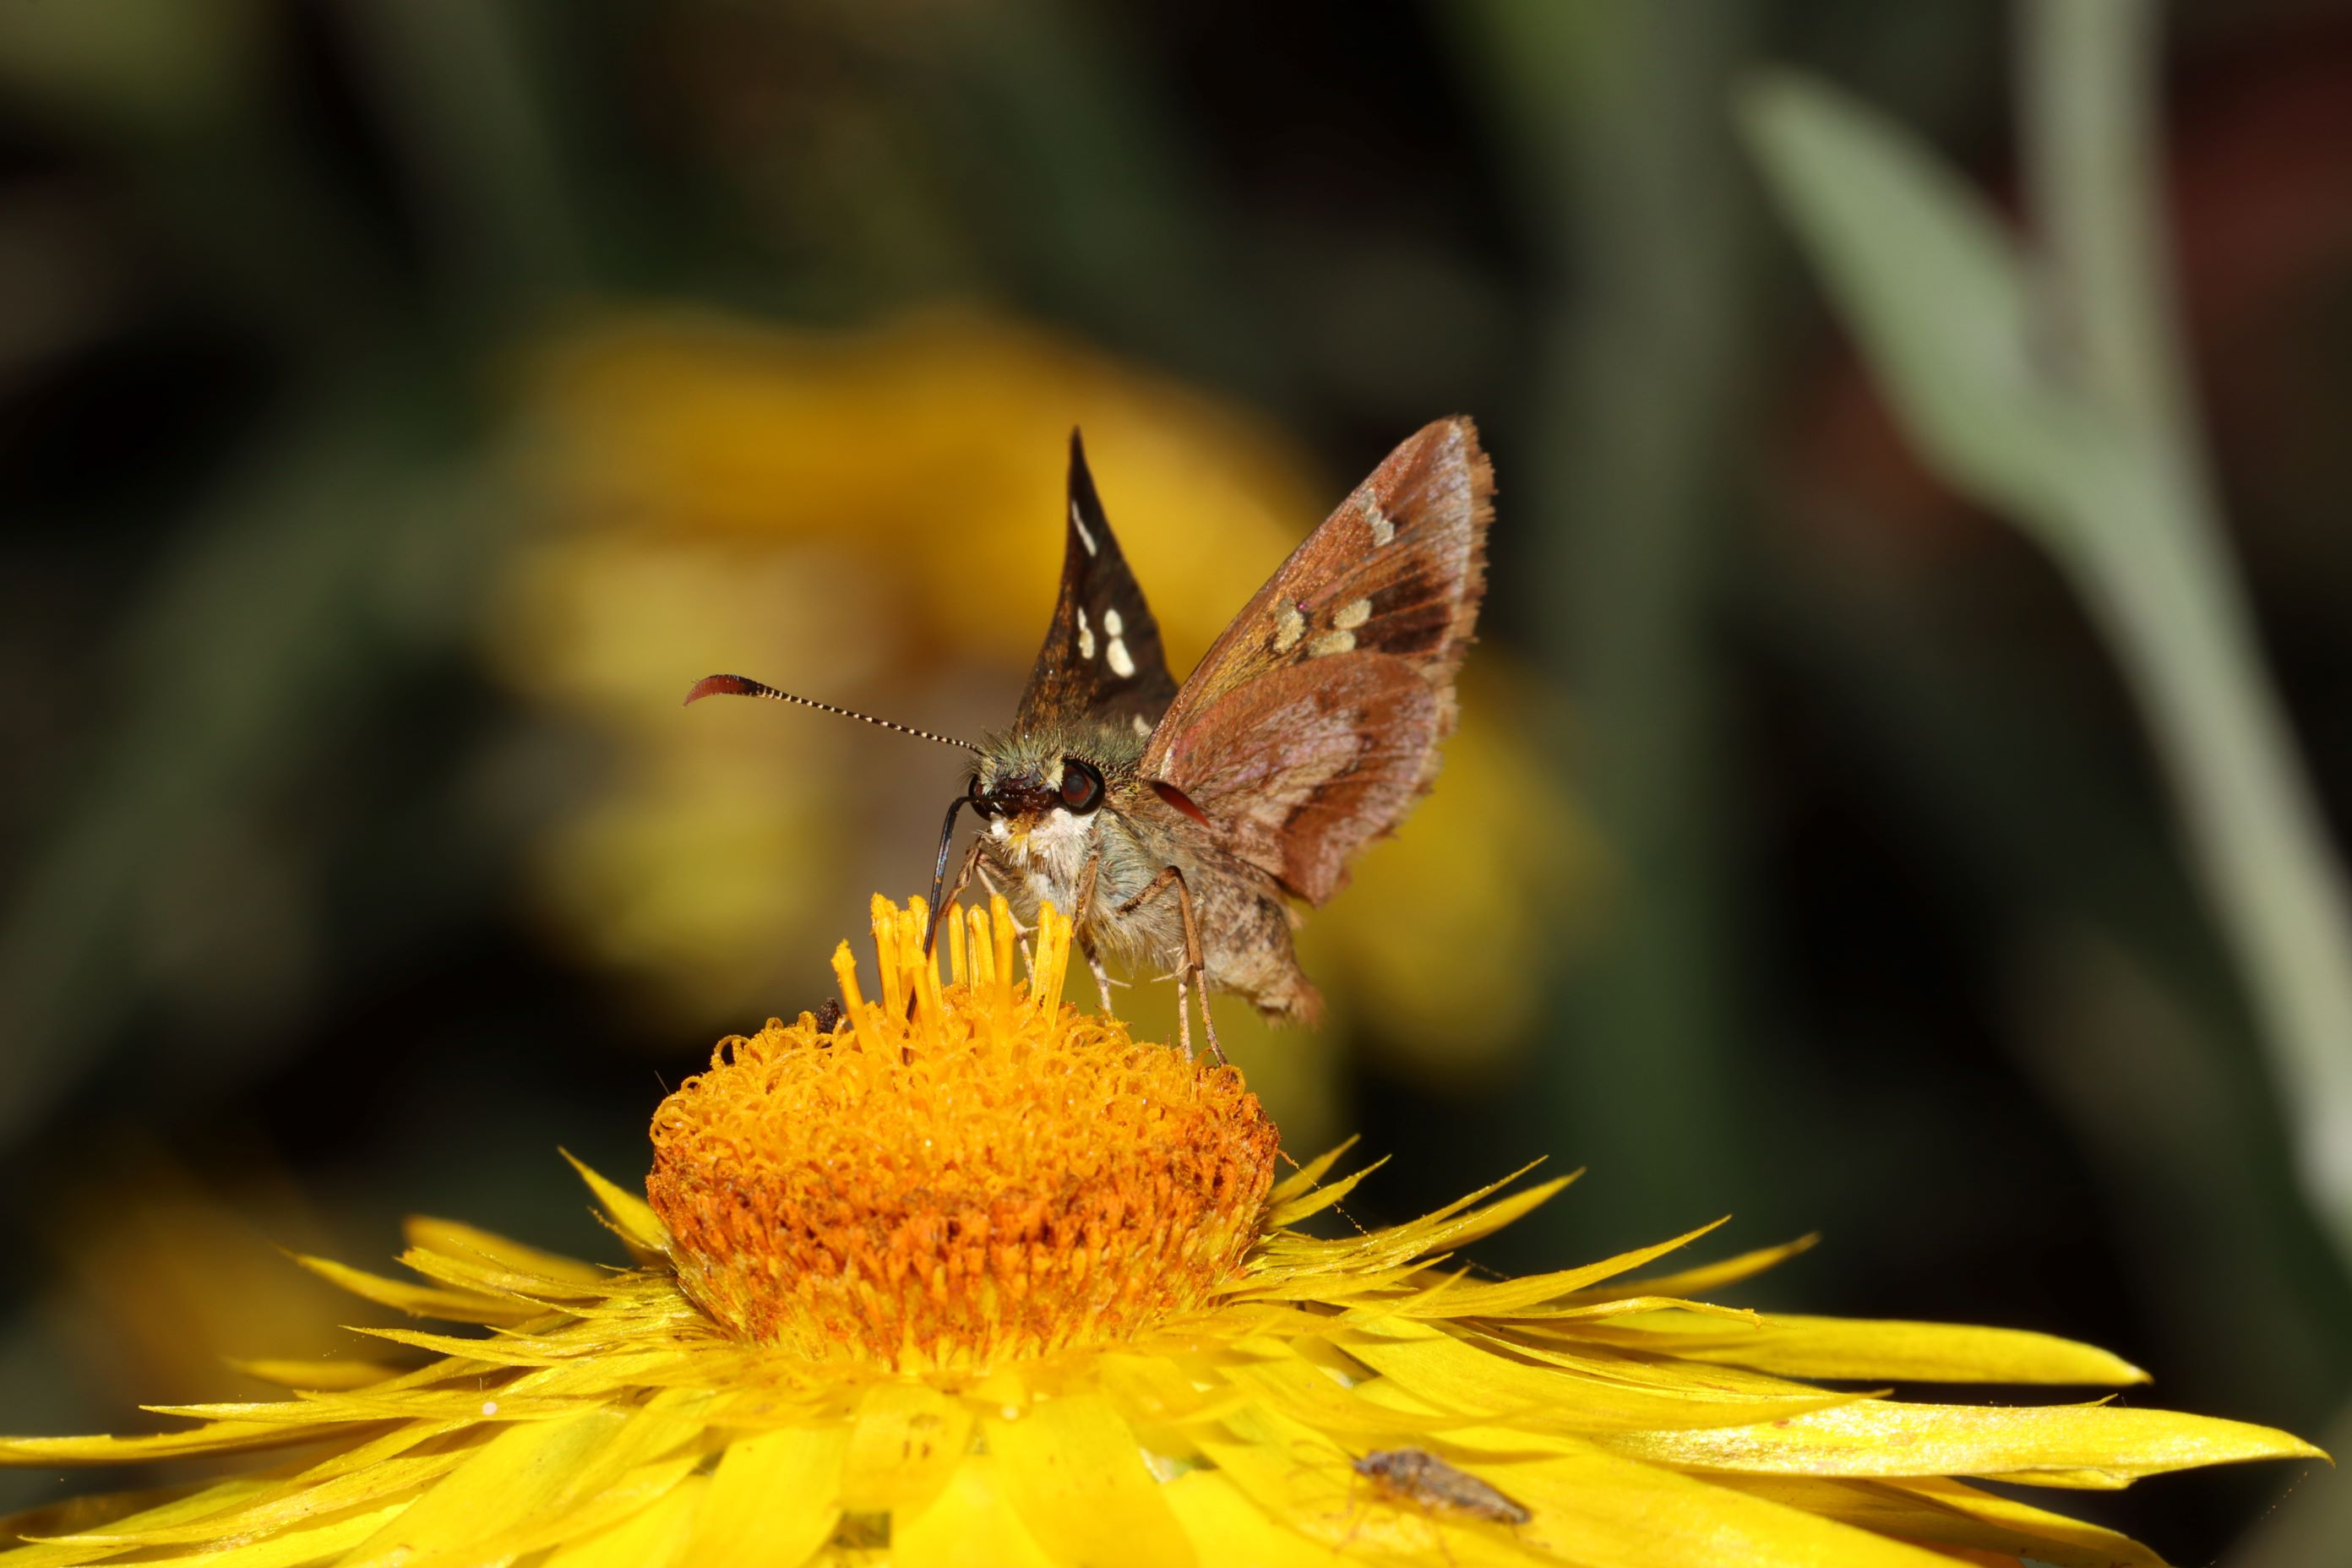 A small brown and white butterfly visiting a yellow flower